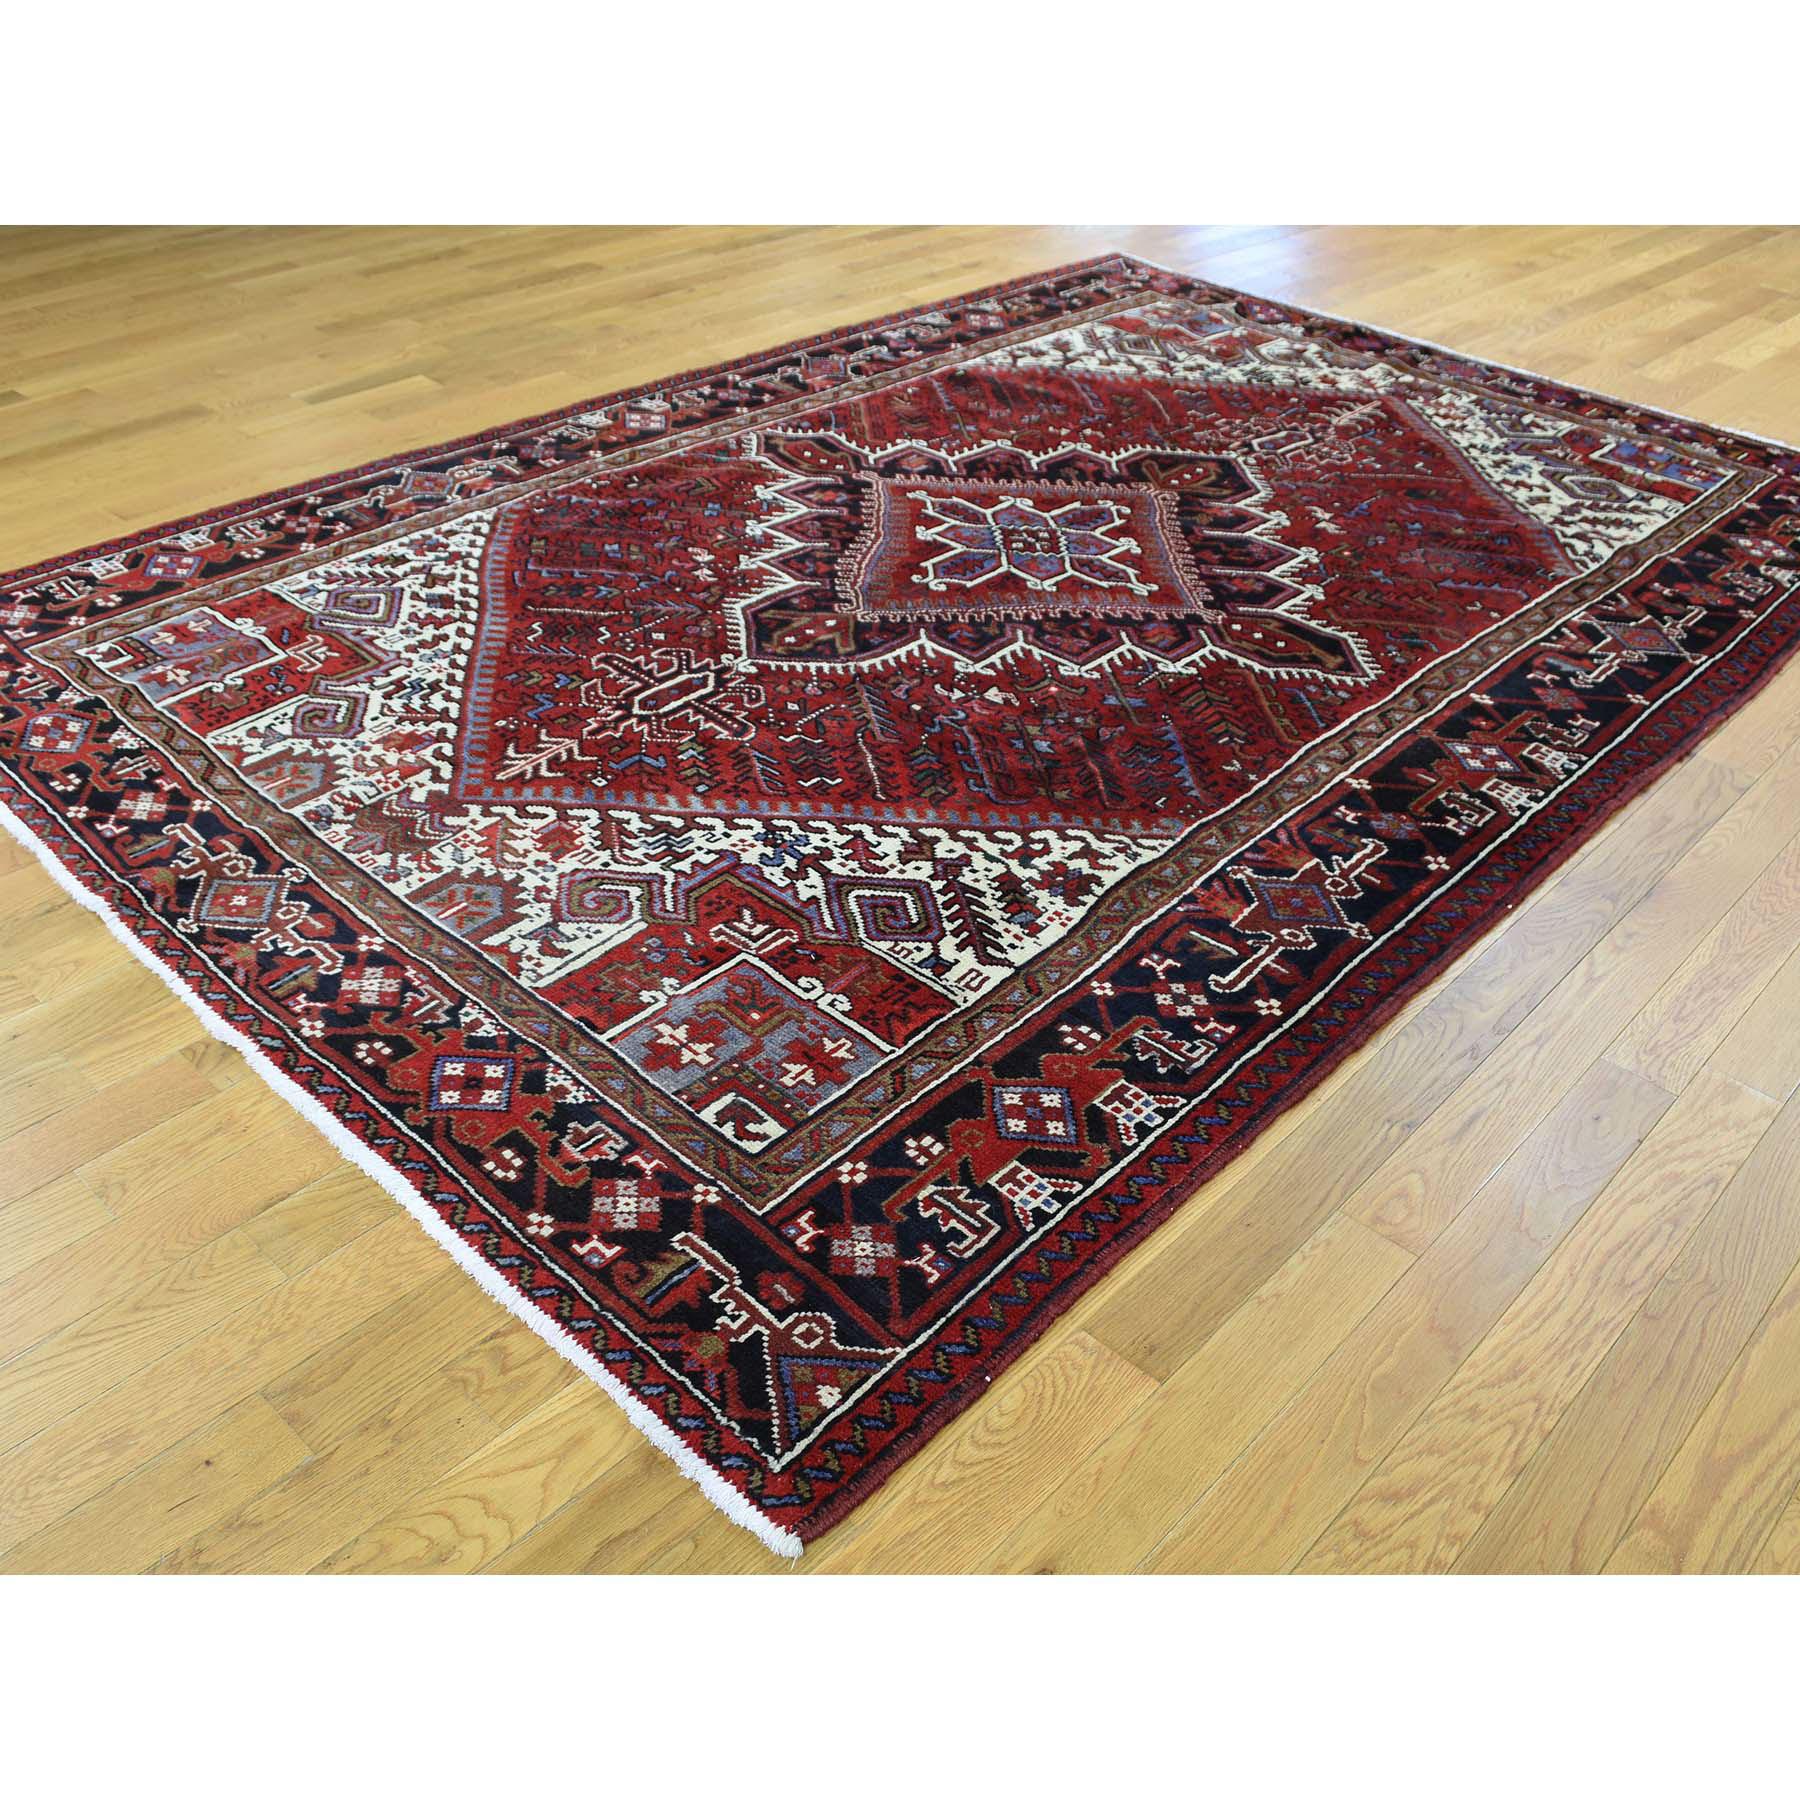 Other Full Pile Semi Antique Persian Heriz Excellent Condition Rug